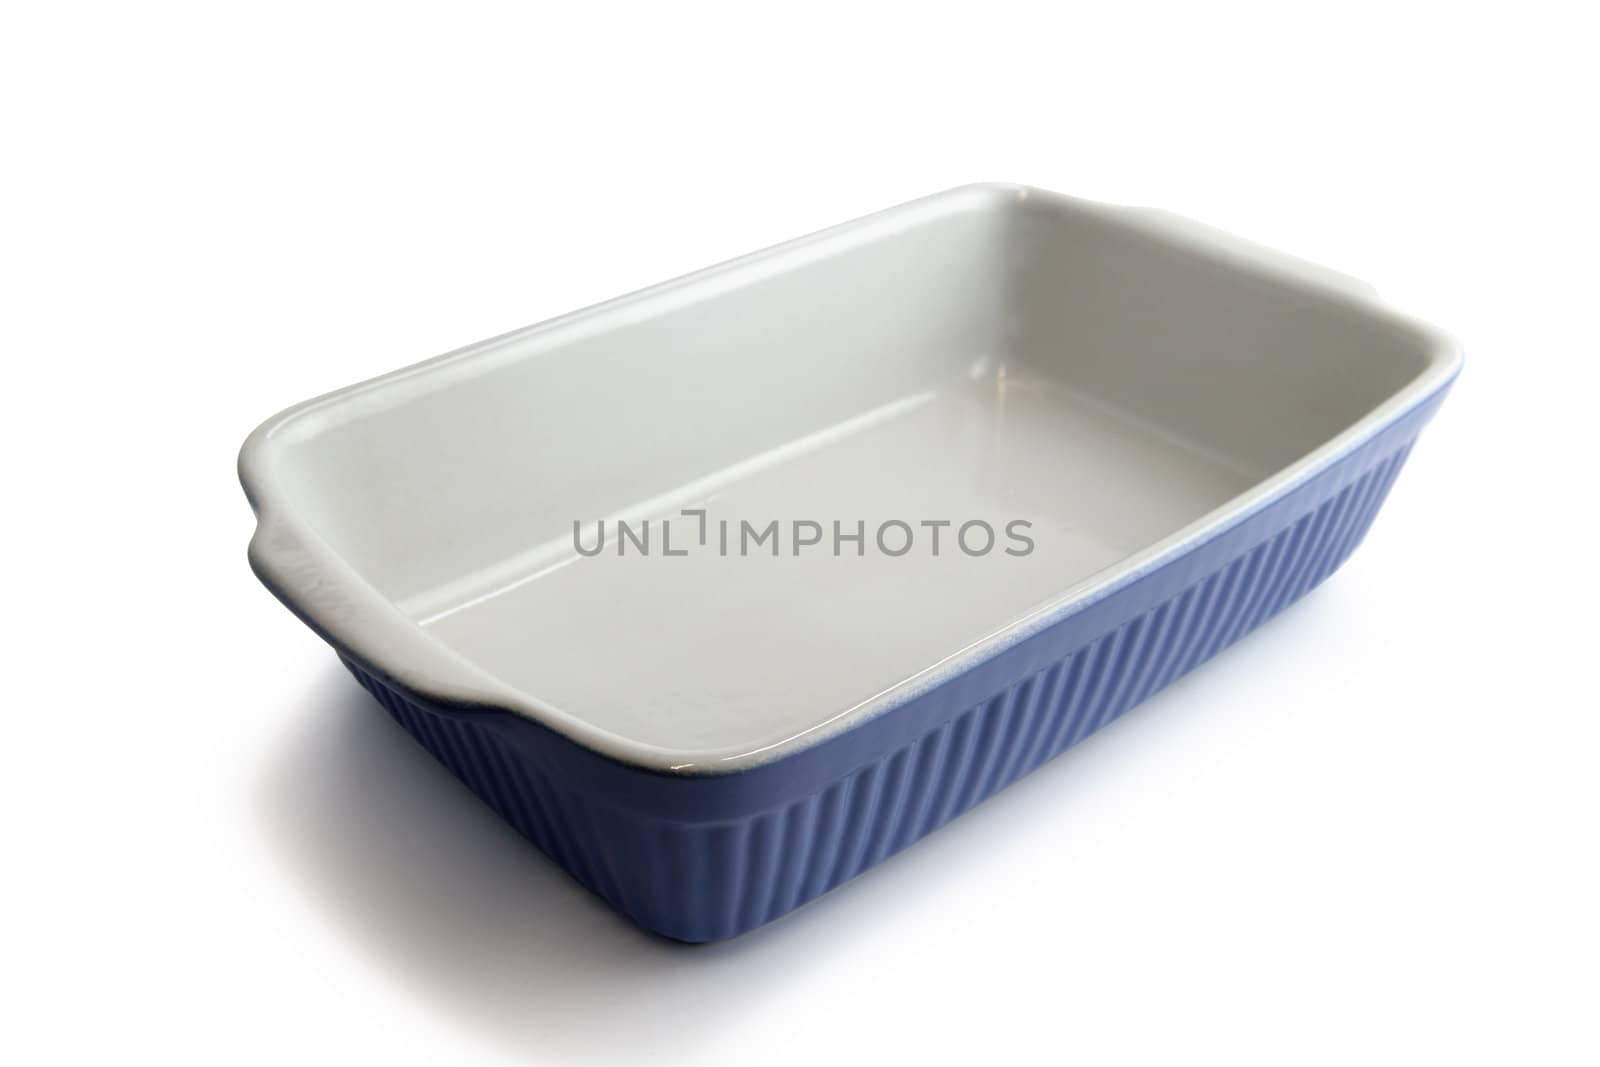 Baking dish by phovoir